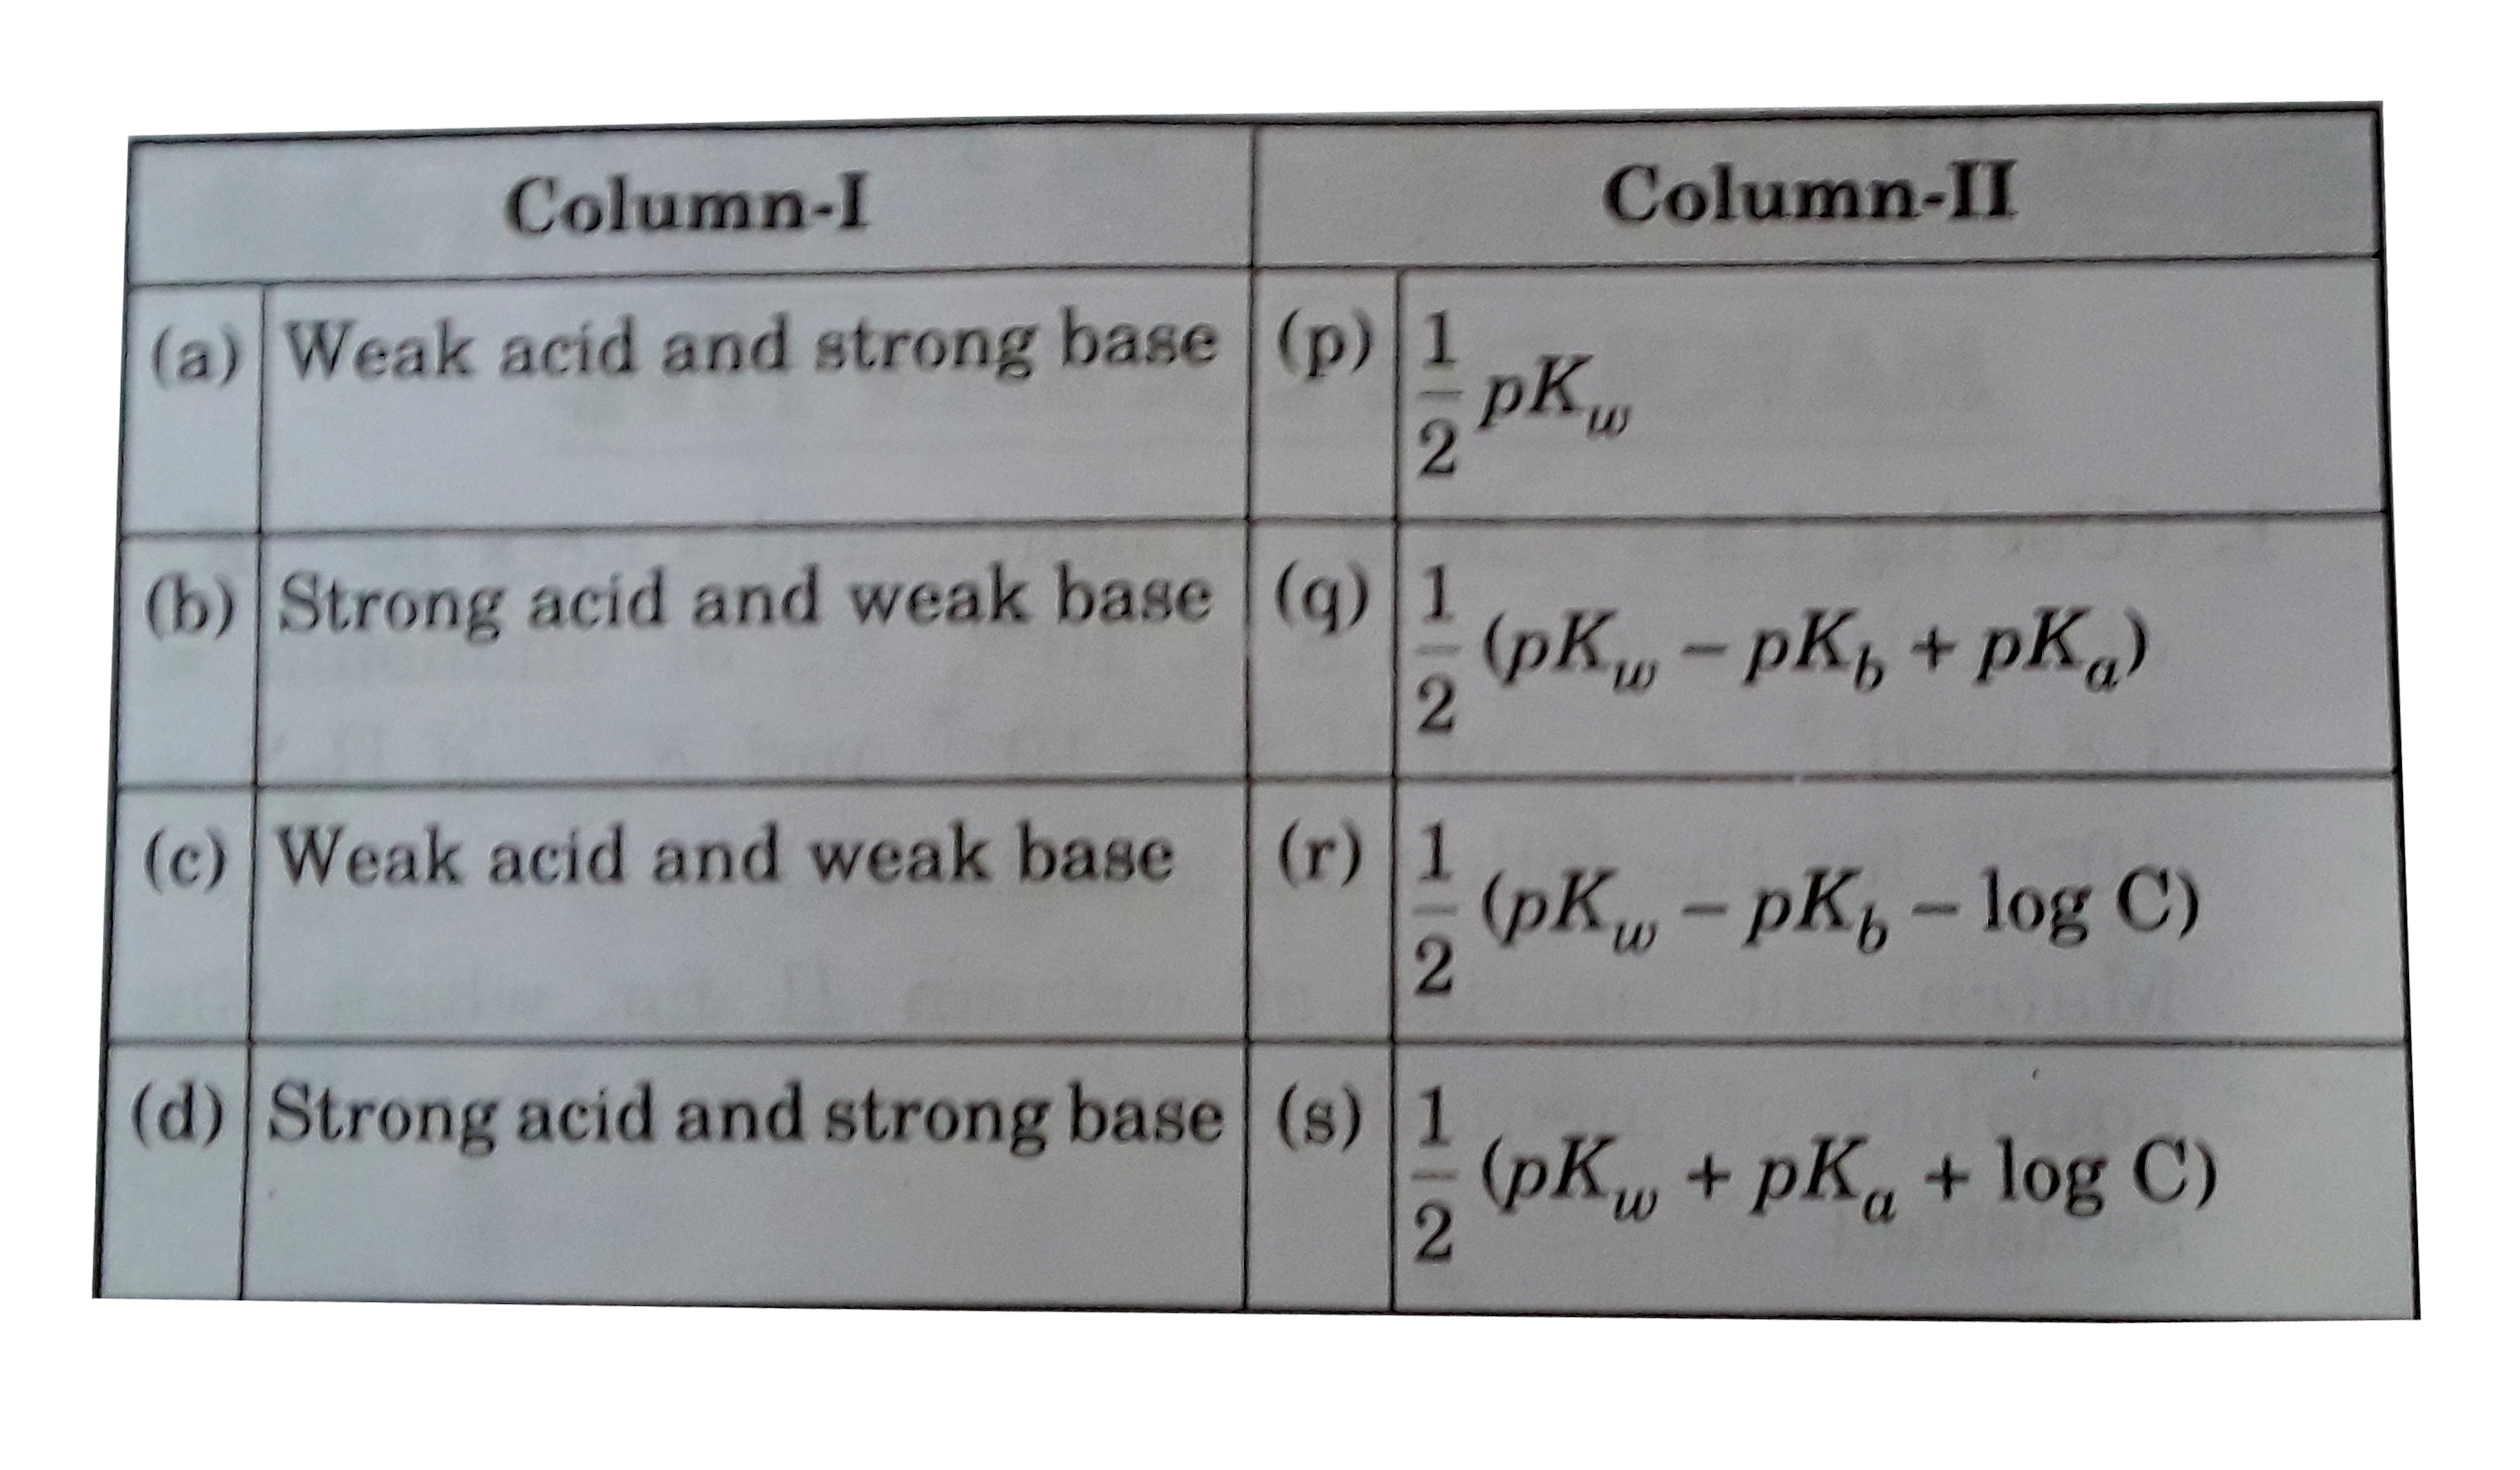 Match column-I (Solution of salts of salts of...) with column-II (pH of the solution is given by):